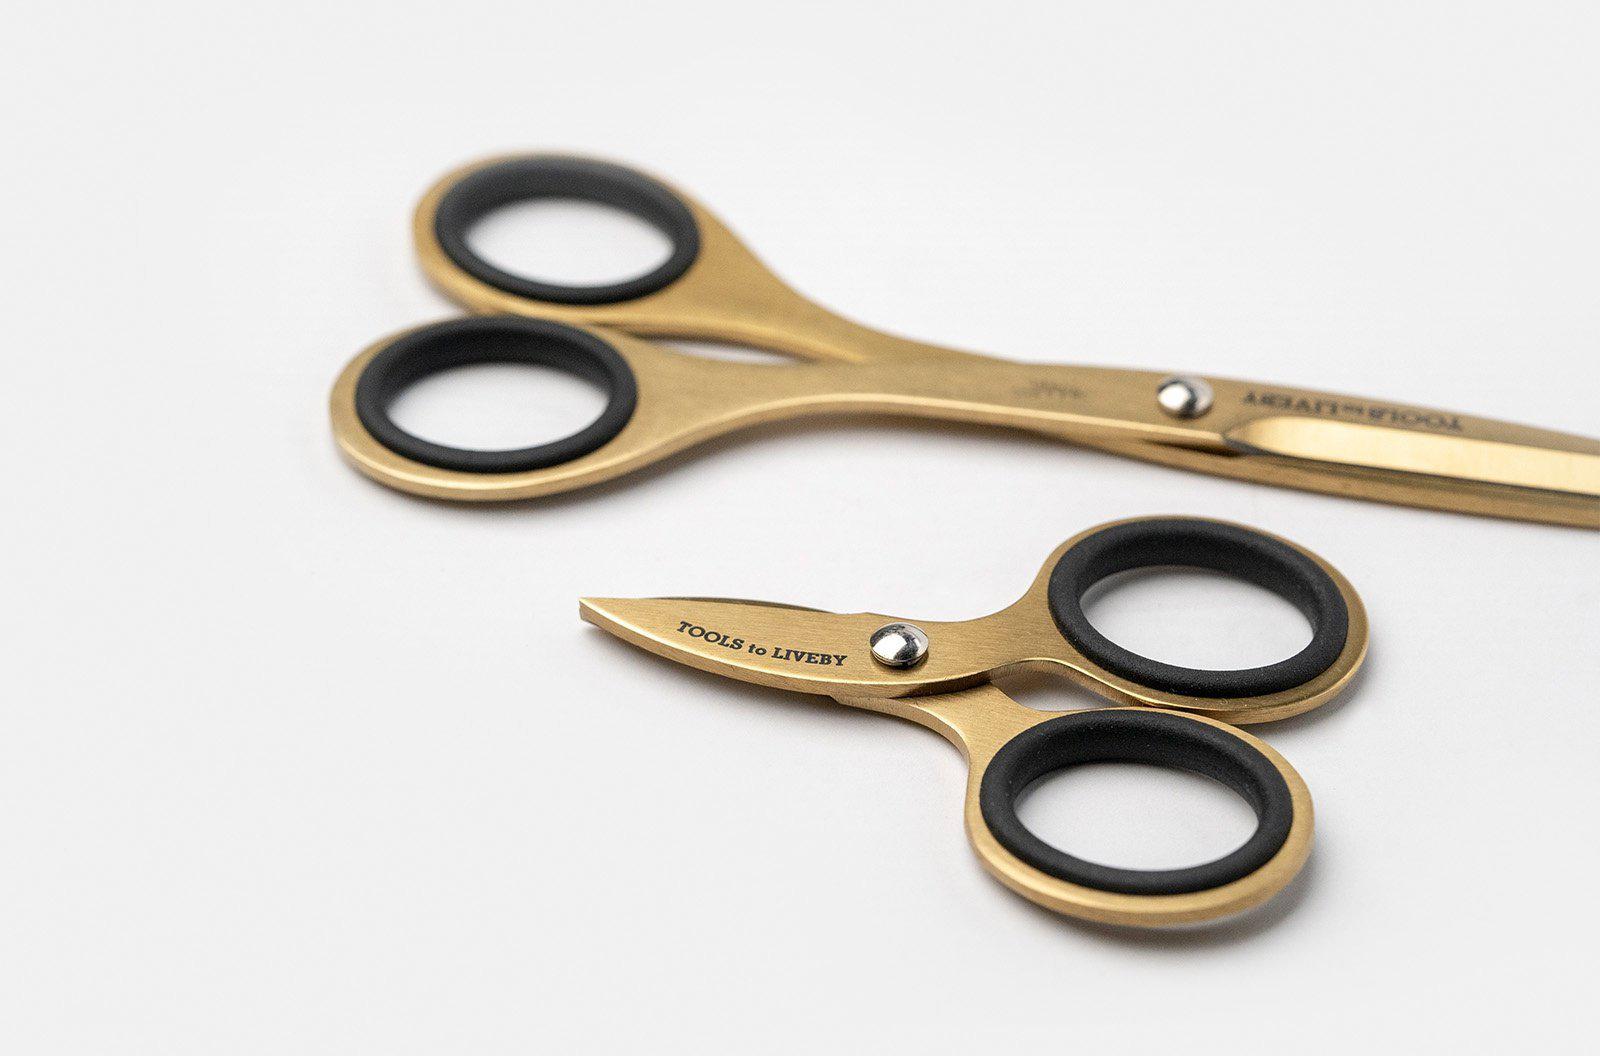 Mini Gold Scissors 3 - Japanese Stainless Steel - Galen Leather